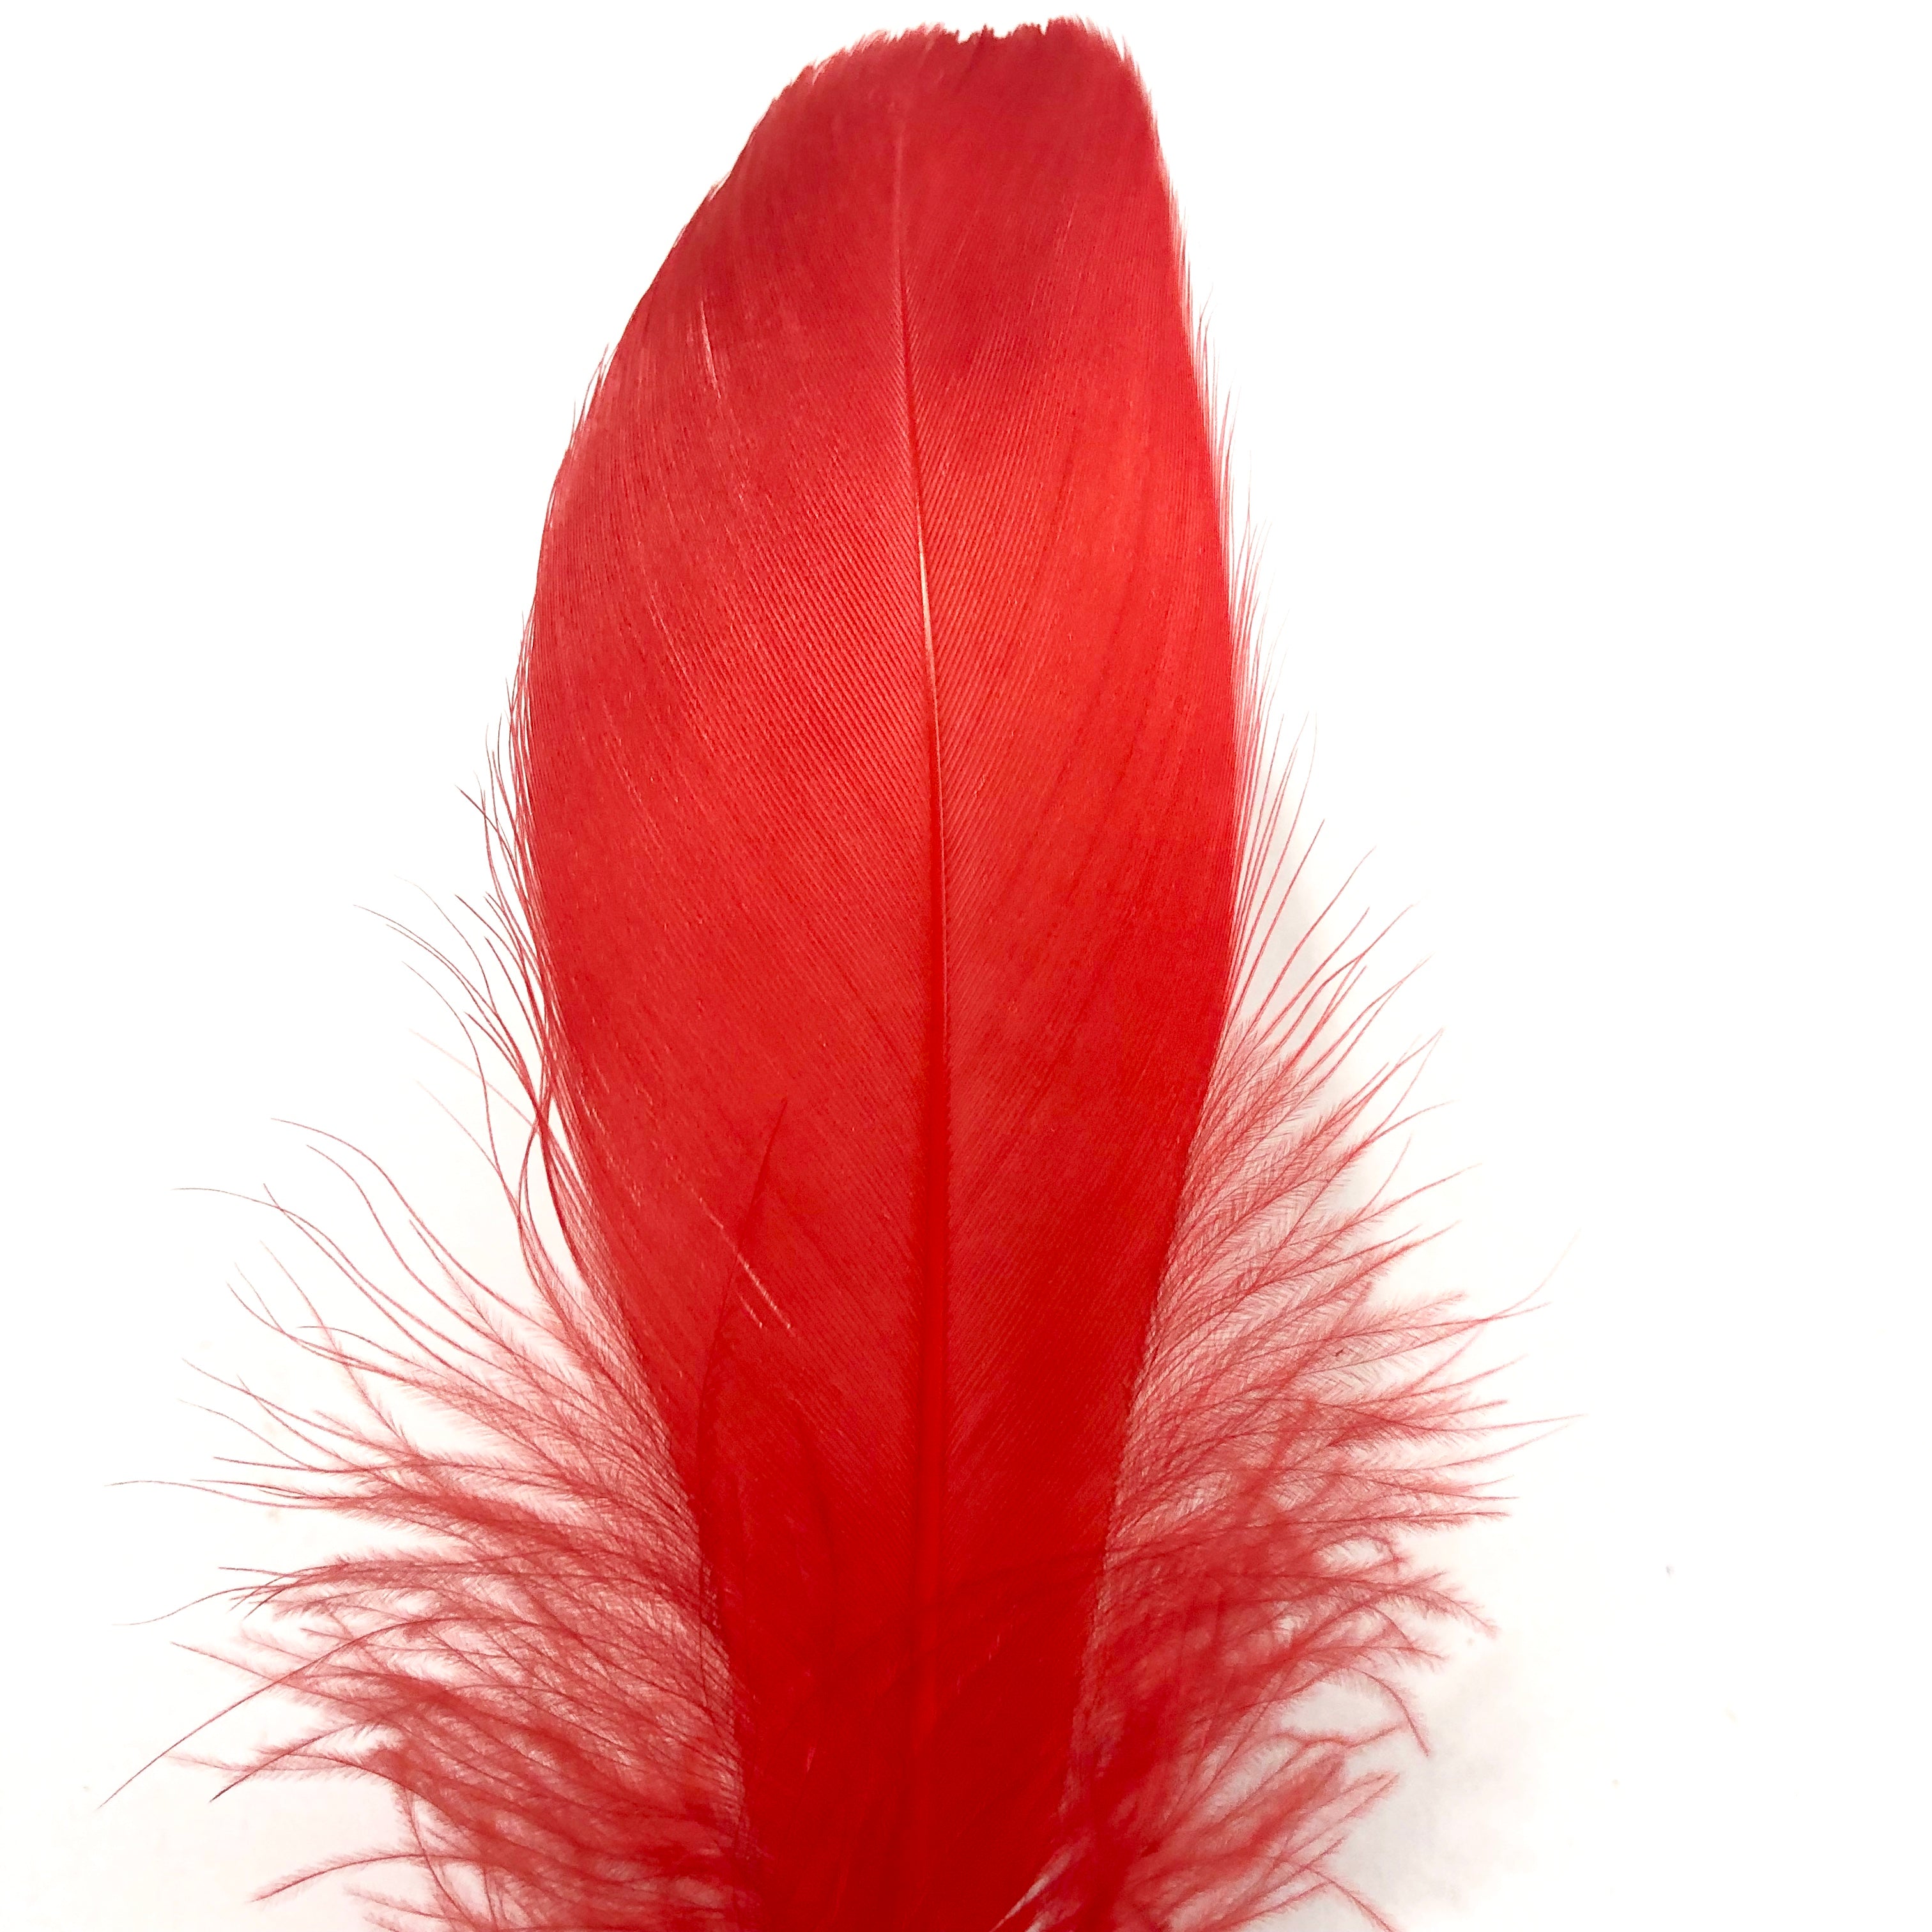 Goose Nagoire Feathers 10 grams - Red